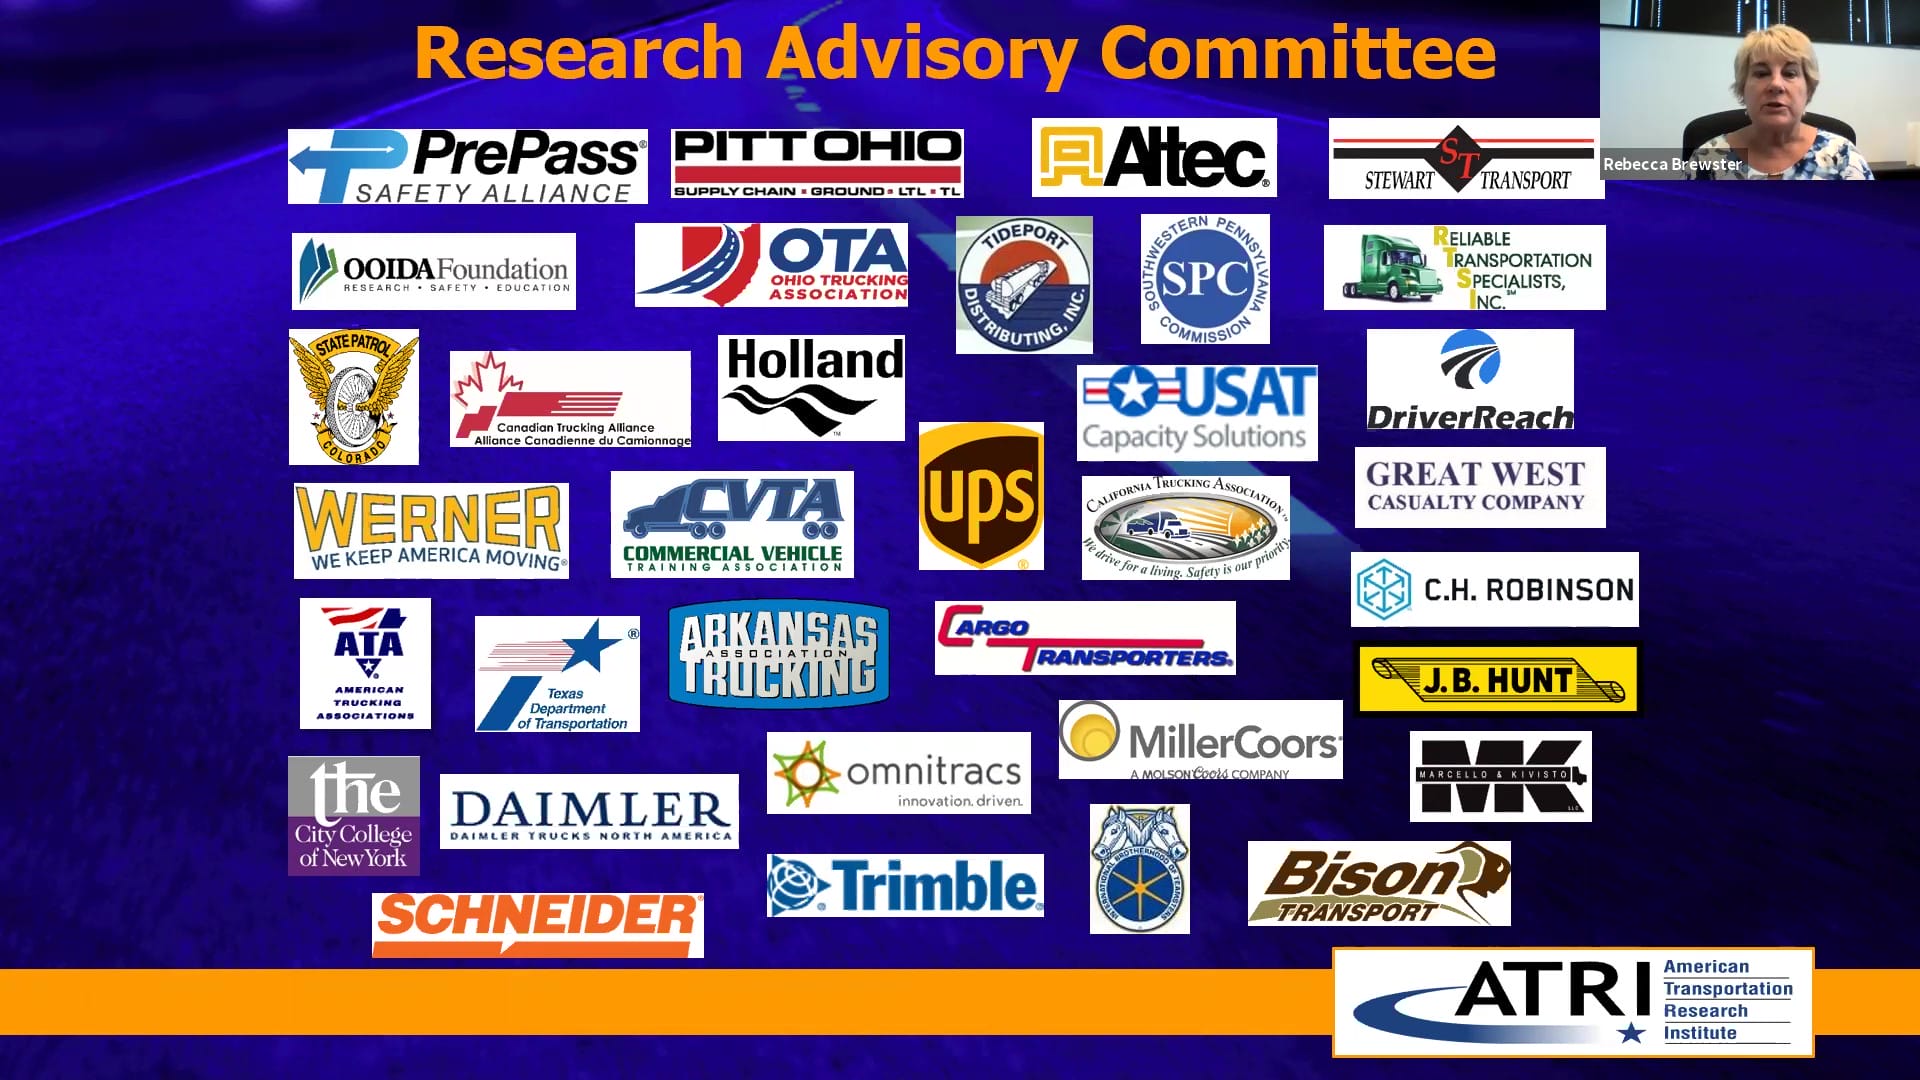 Trucking Industry Concerns 2020 from ATRI Research Advisory Commitee